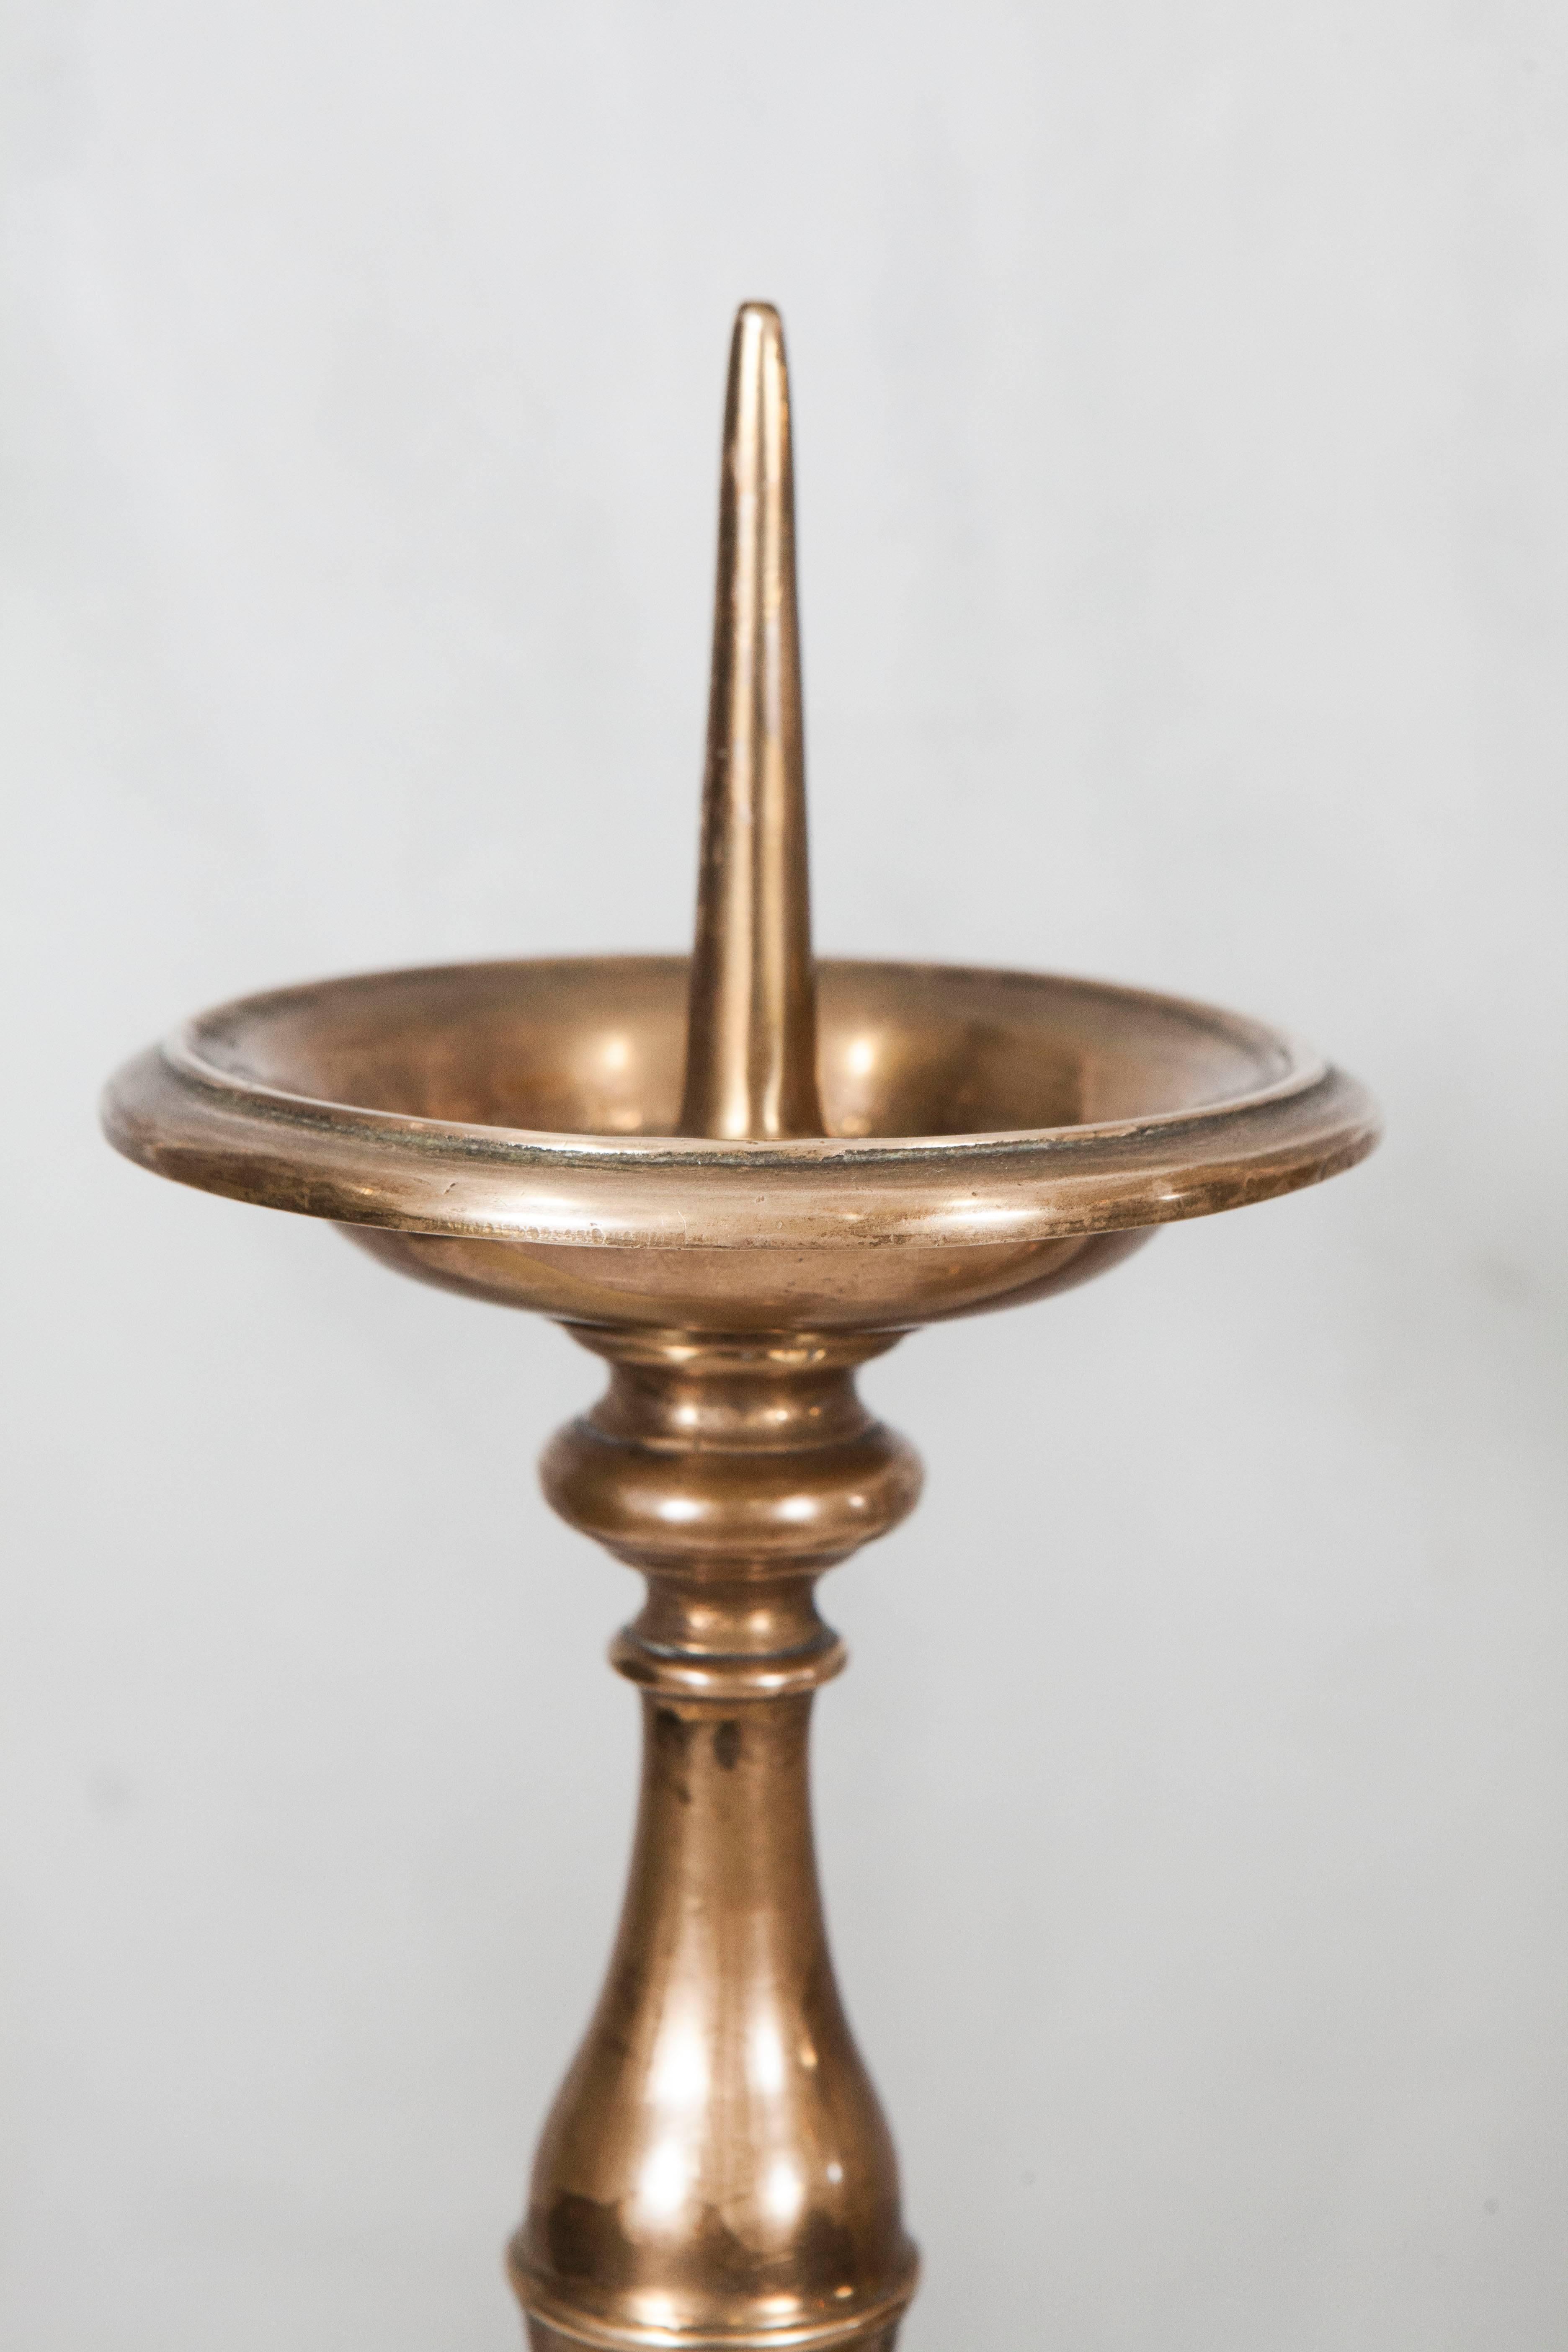 Pair of Dutch brass pricket candlesticks from the 19th century in an earlier style with upswept drip-pans raised on turned baluster and egg-knopped stem, with triangular step moulded weighted bases supported by ball feet.

